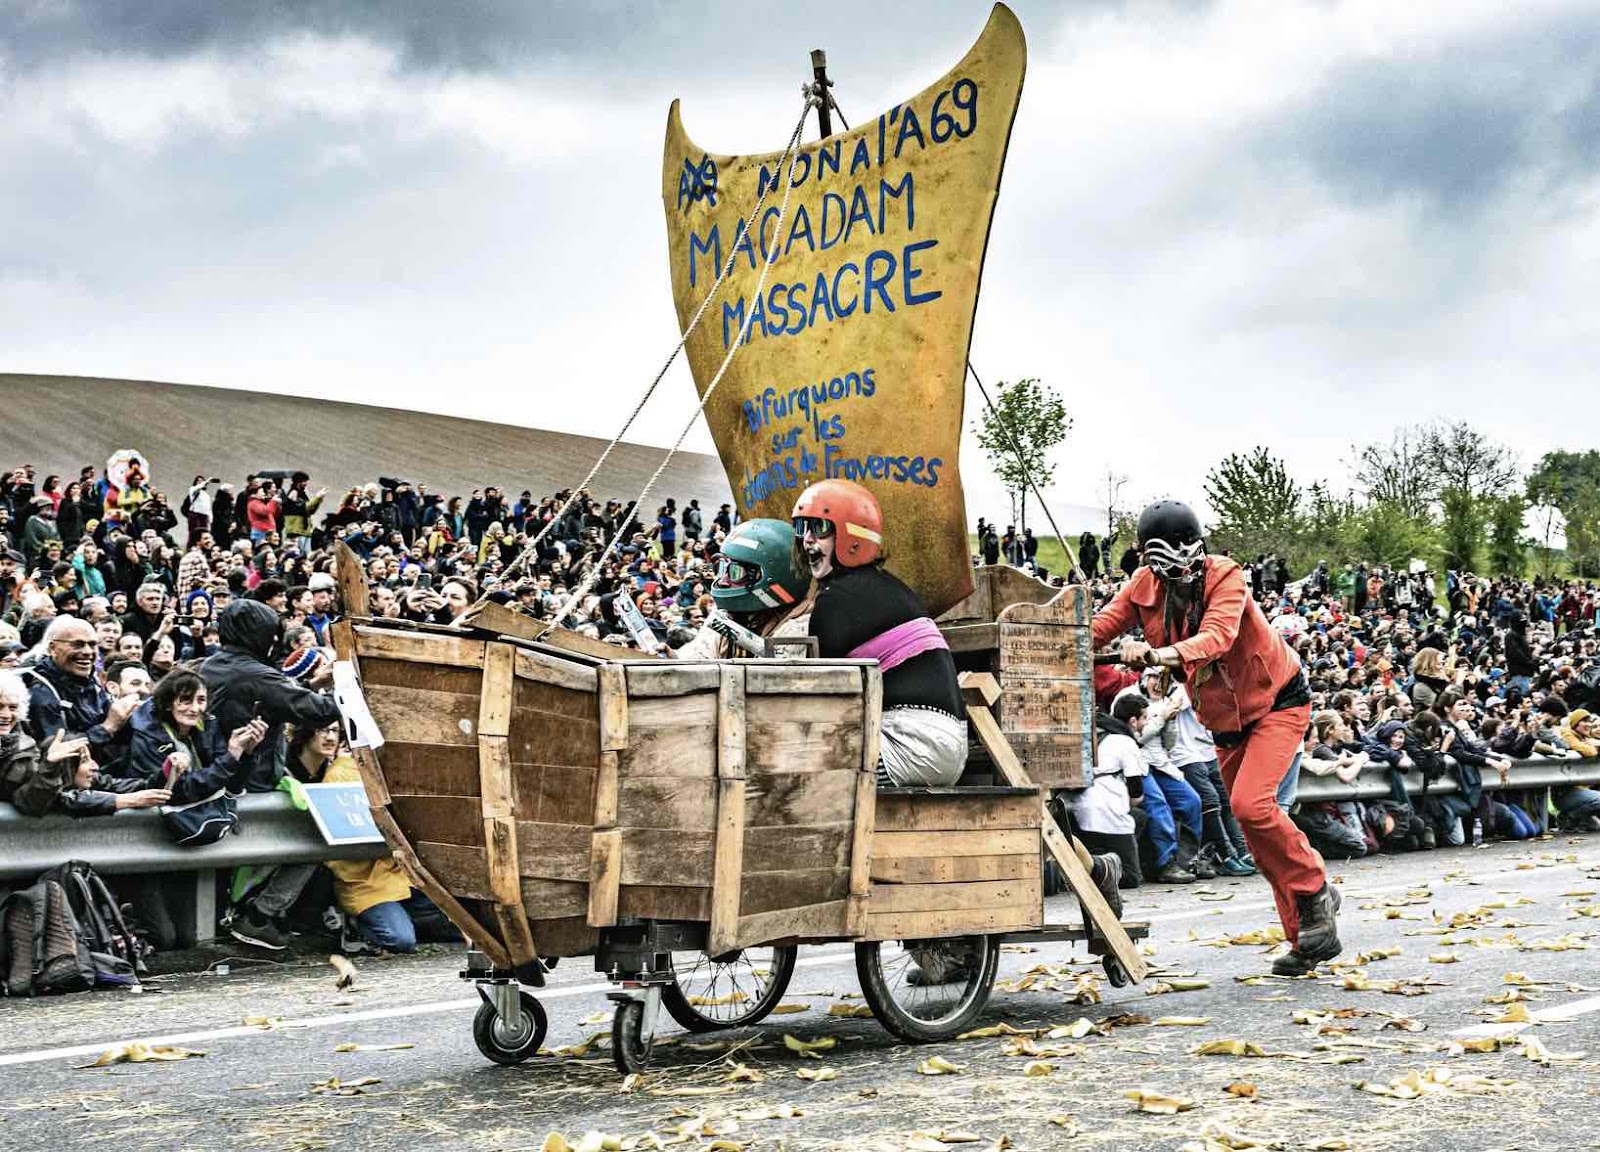 Earth Uprising activists race down a motorway in ship built on bike wheels as a crowd cheers them on